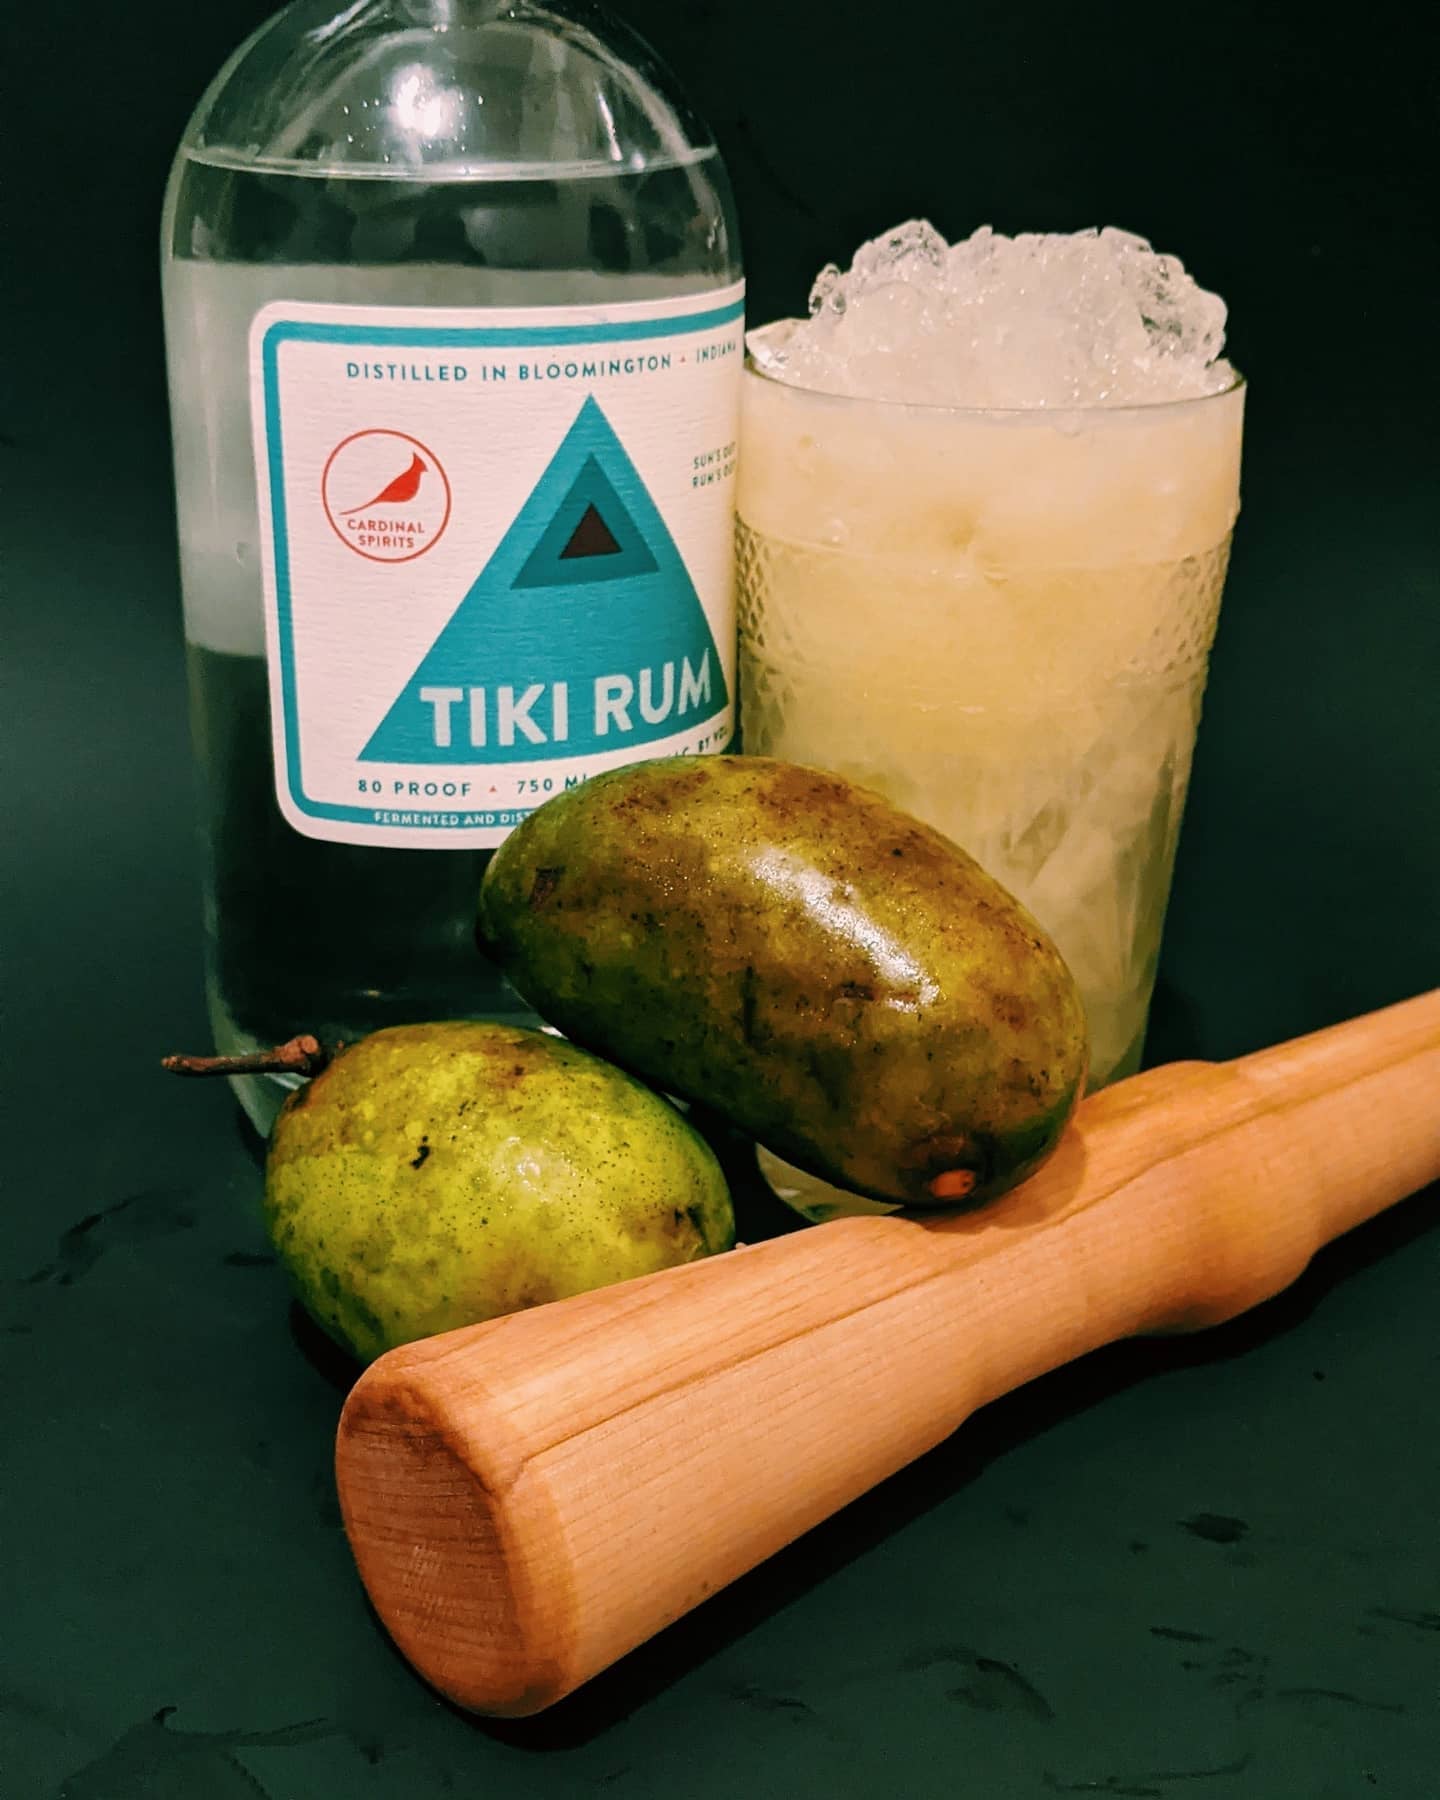 Muddled Cocktails: Grand-paw would be proud